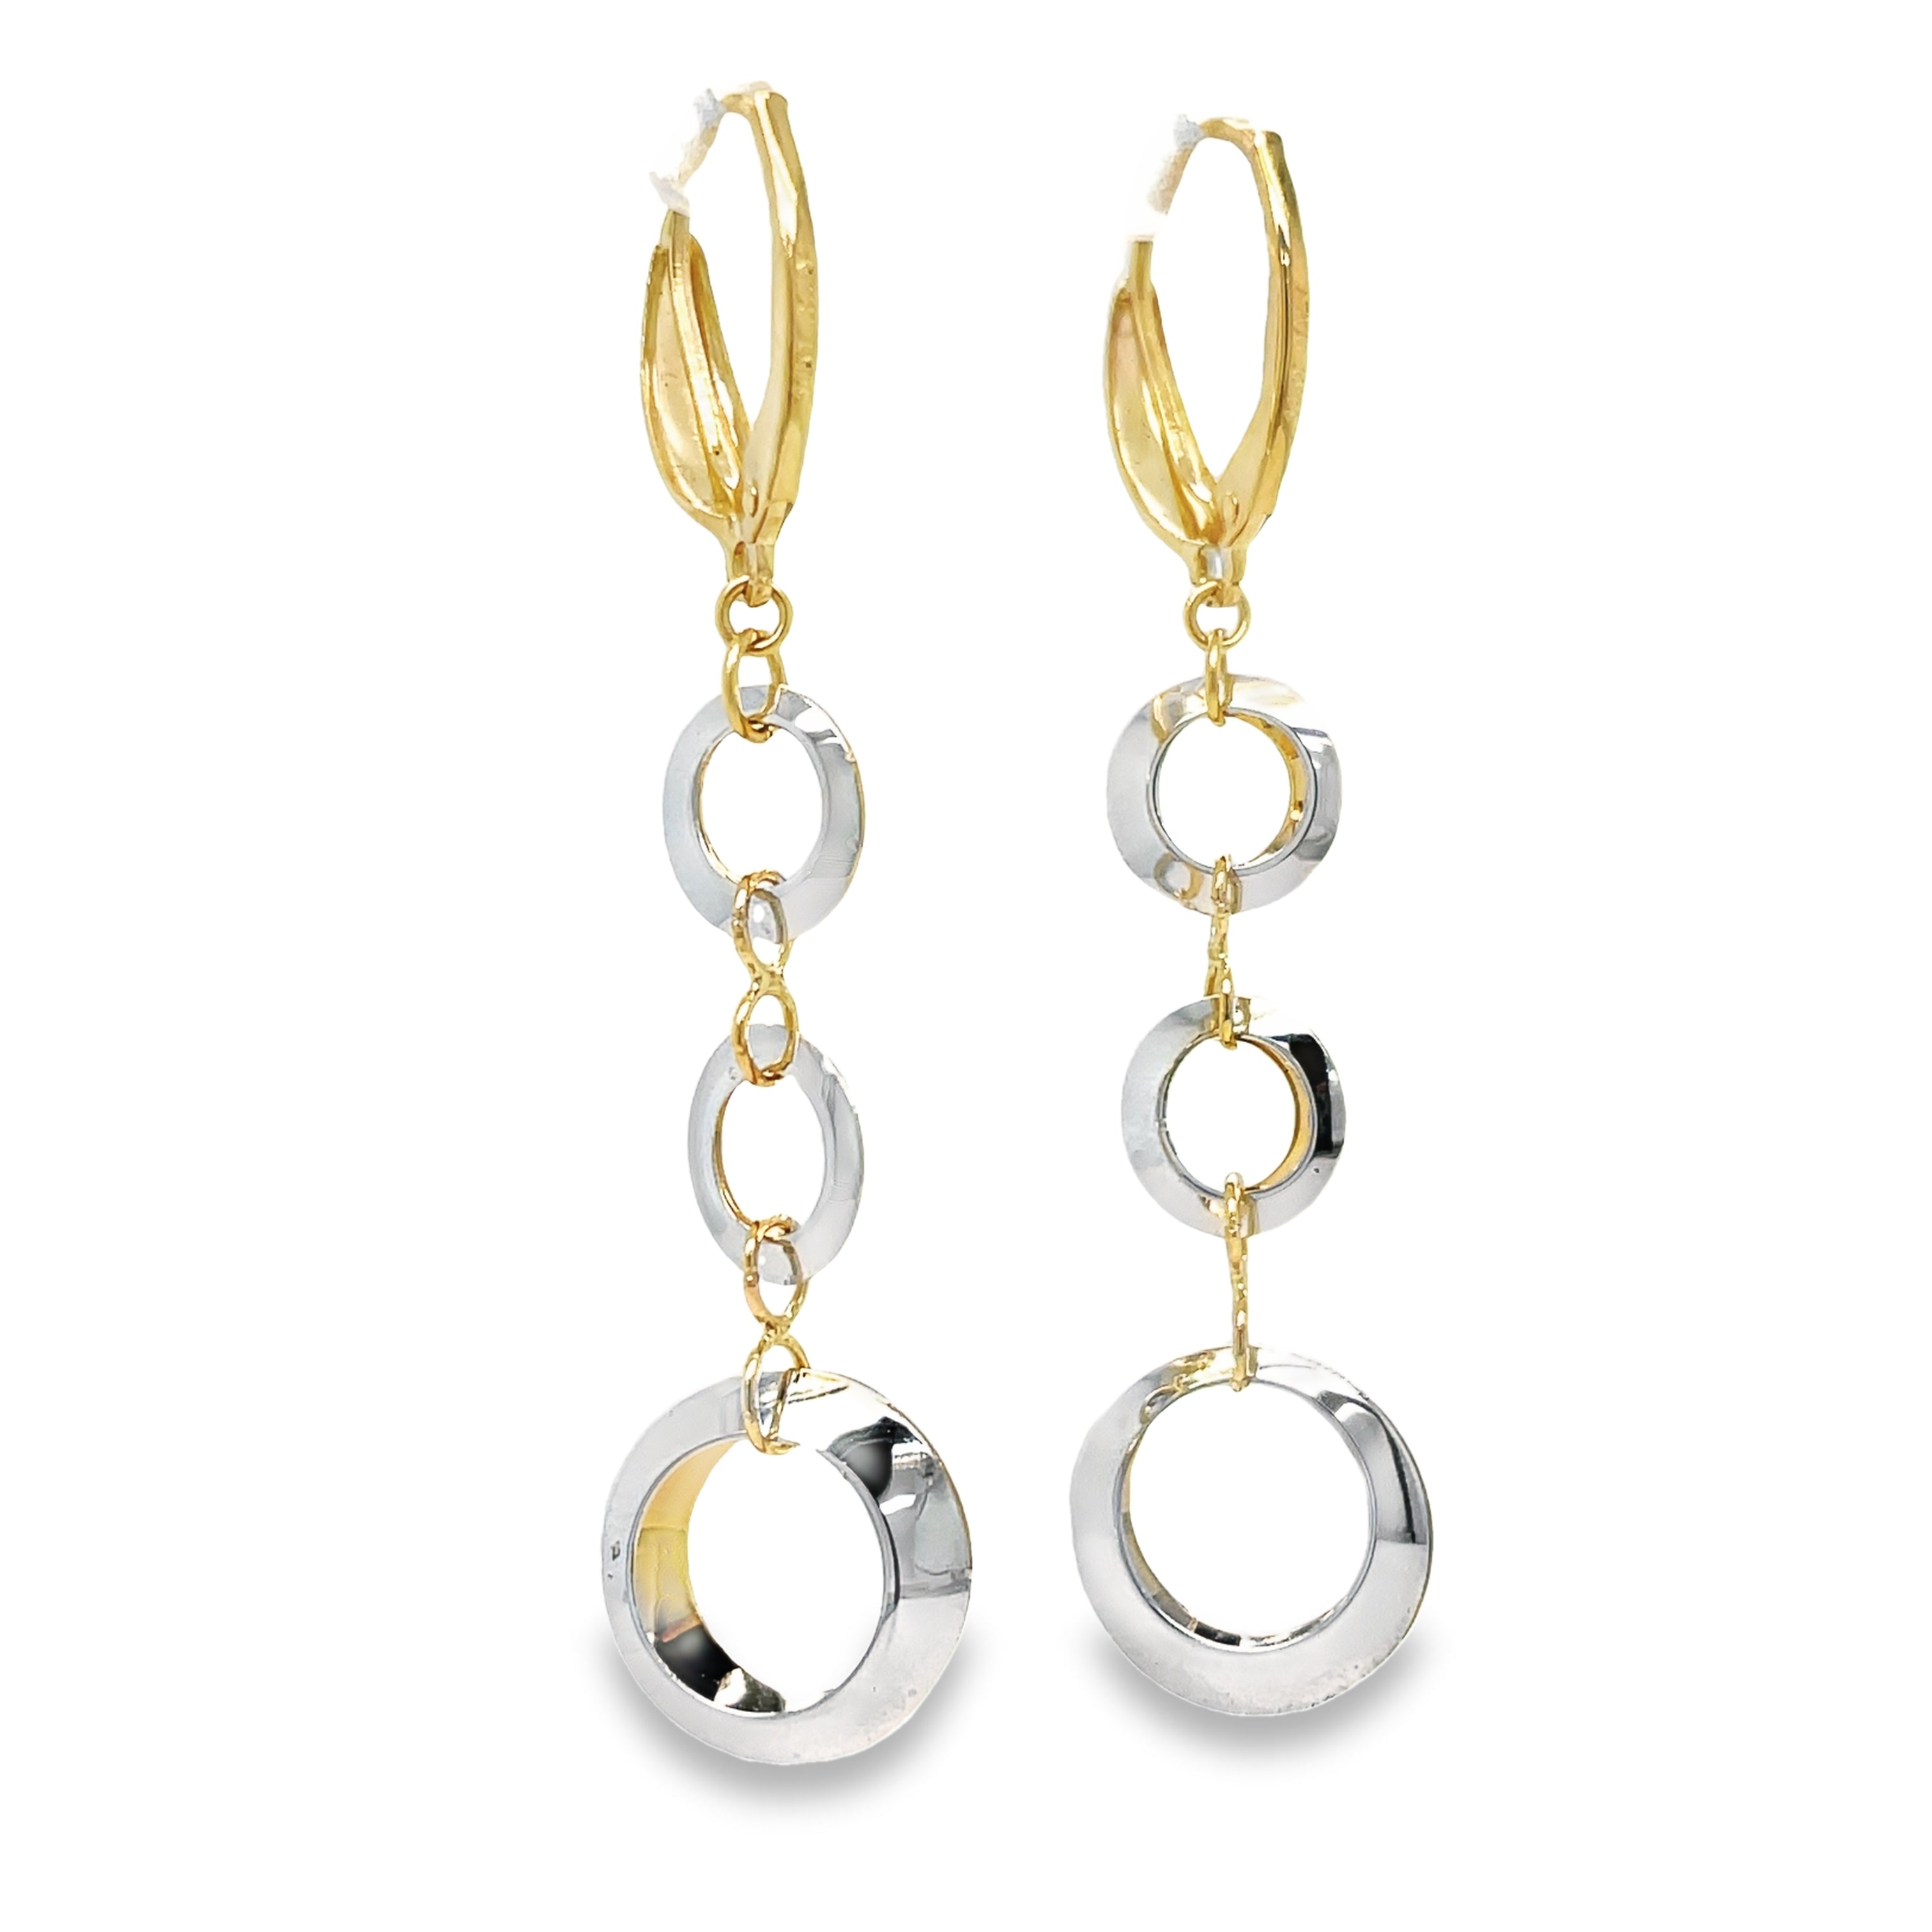 Elevate your style with these stunning 14k Italian Two Tone Circles Drop Earrings. Crafted with a lever system, these 2" long earrings feature three graduated circles for a unique and elegant look. Made in Italy, they exude quality and sophistication. A must-have addition to your jewelry collection.